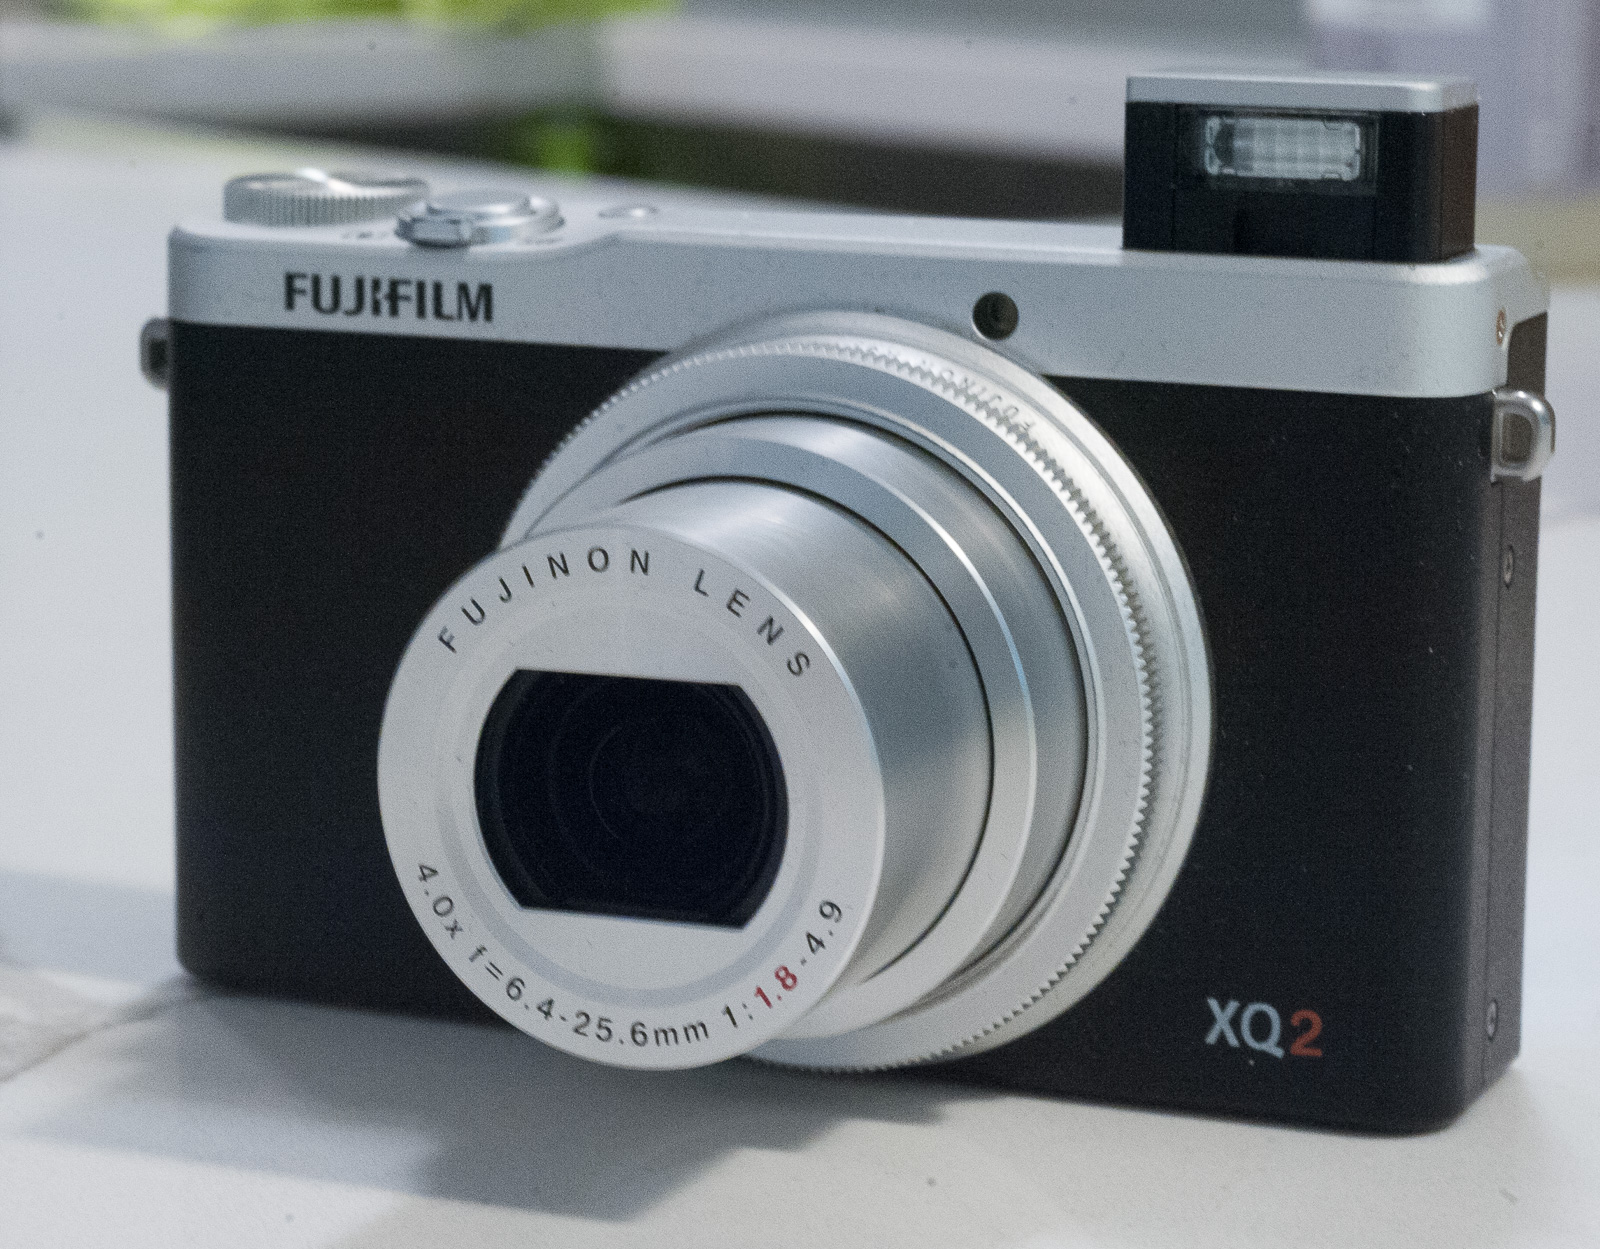 And now for something completely different: the Fujifilm XQ2